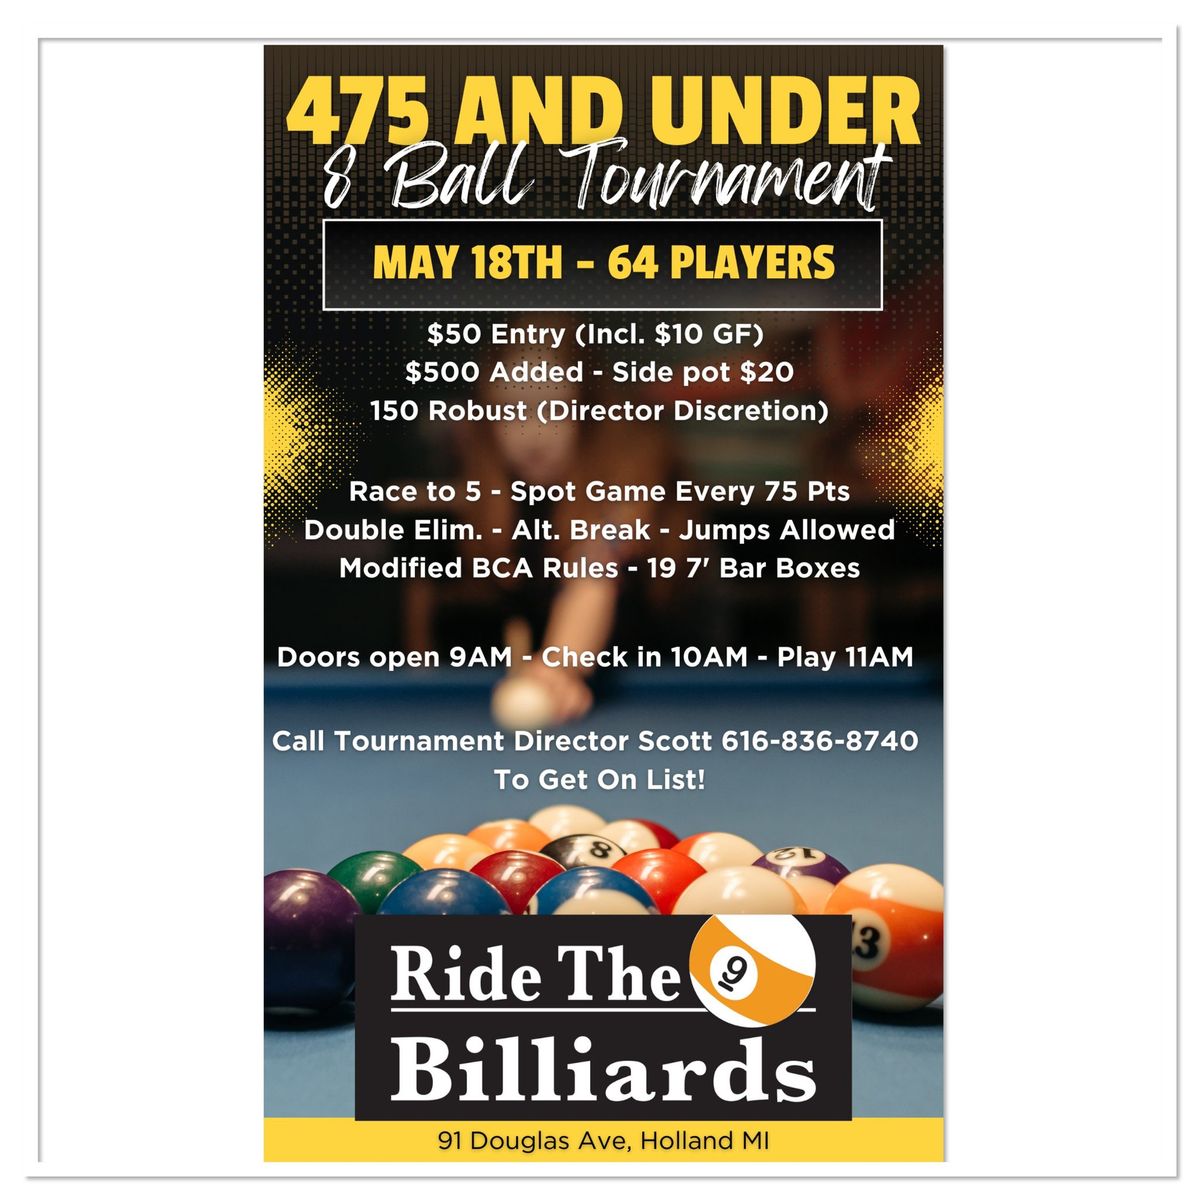 475 and Under 8 Ball Tournament 